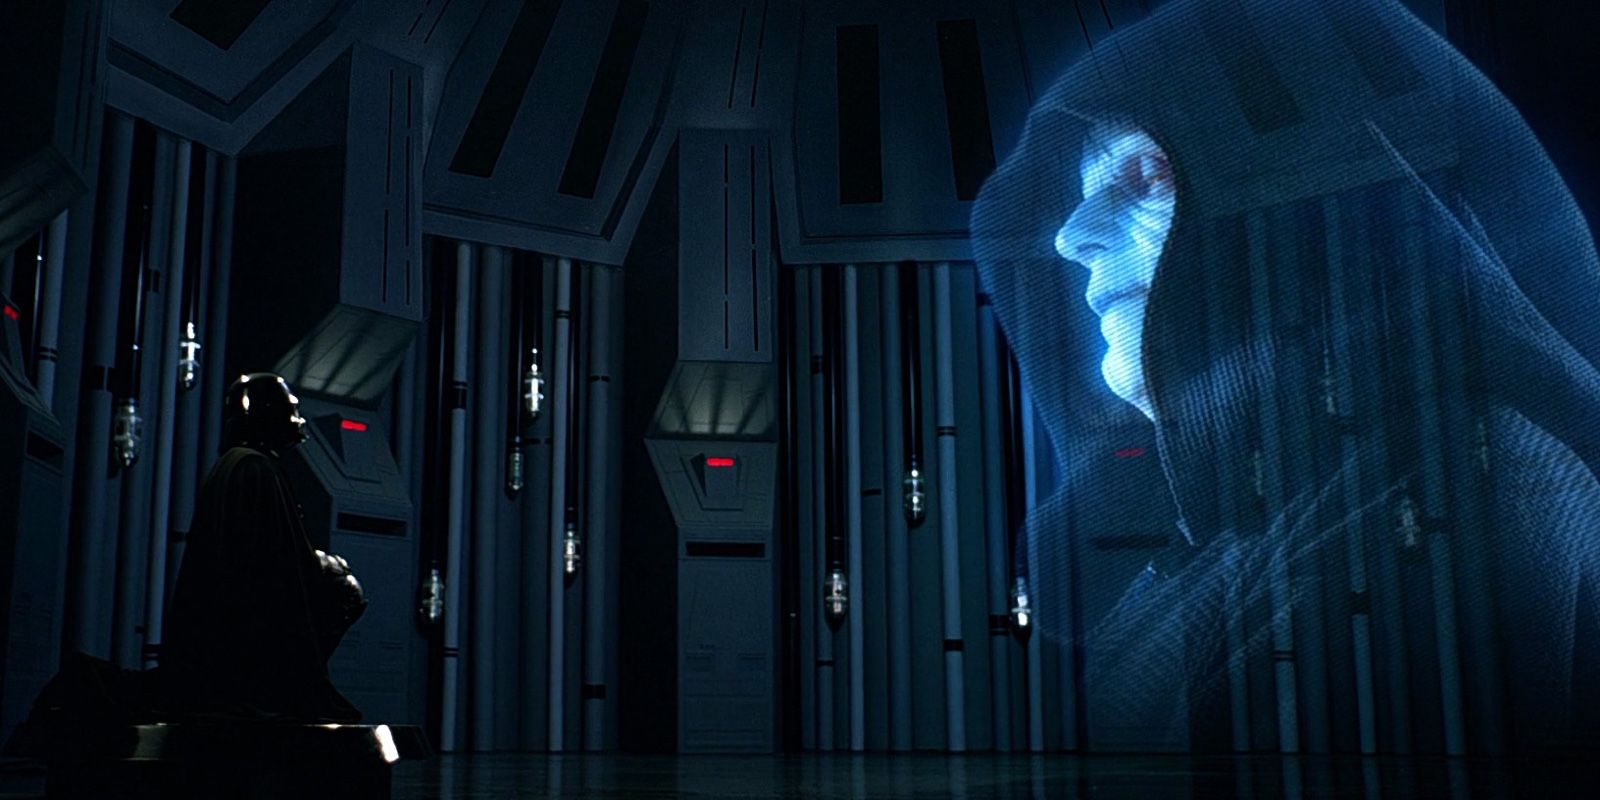 Darth Vader speaks to the Emperor's hologram in The Empire Strikes Back